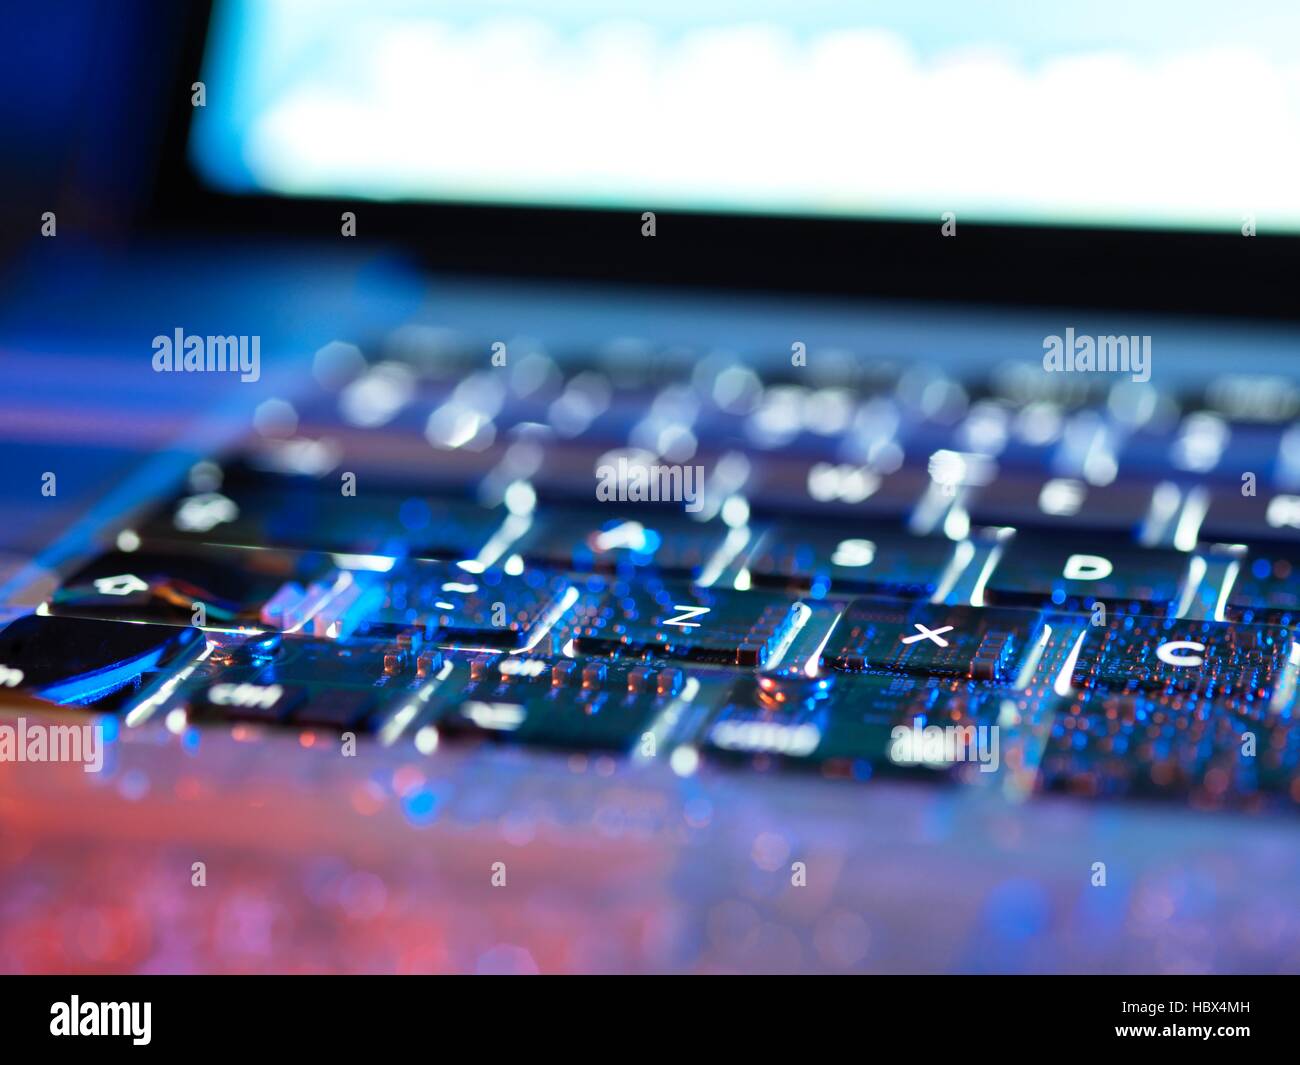 Double exposure of a laptop computer keyboard exposing the electronics underneath. Stock Photo